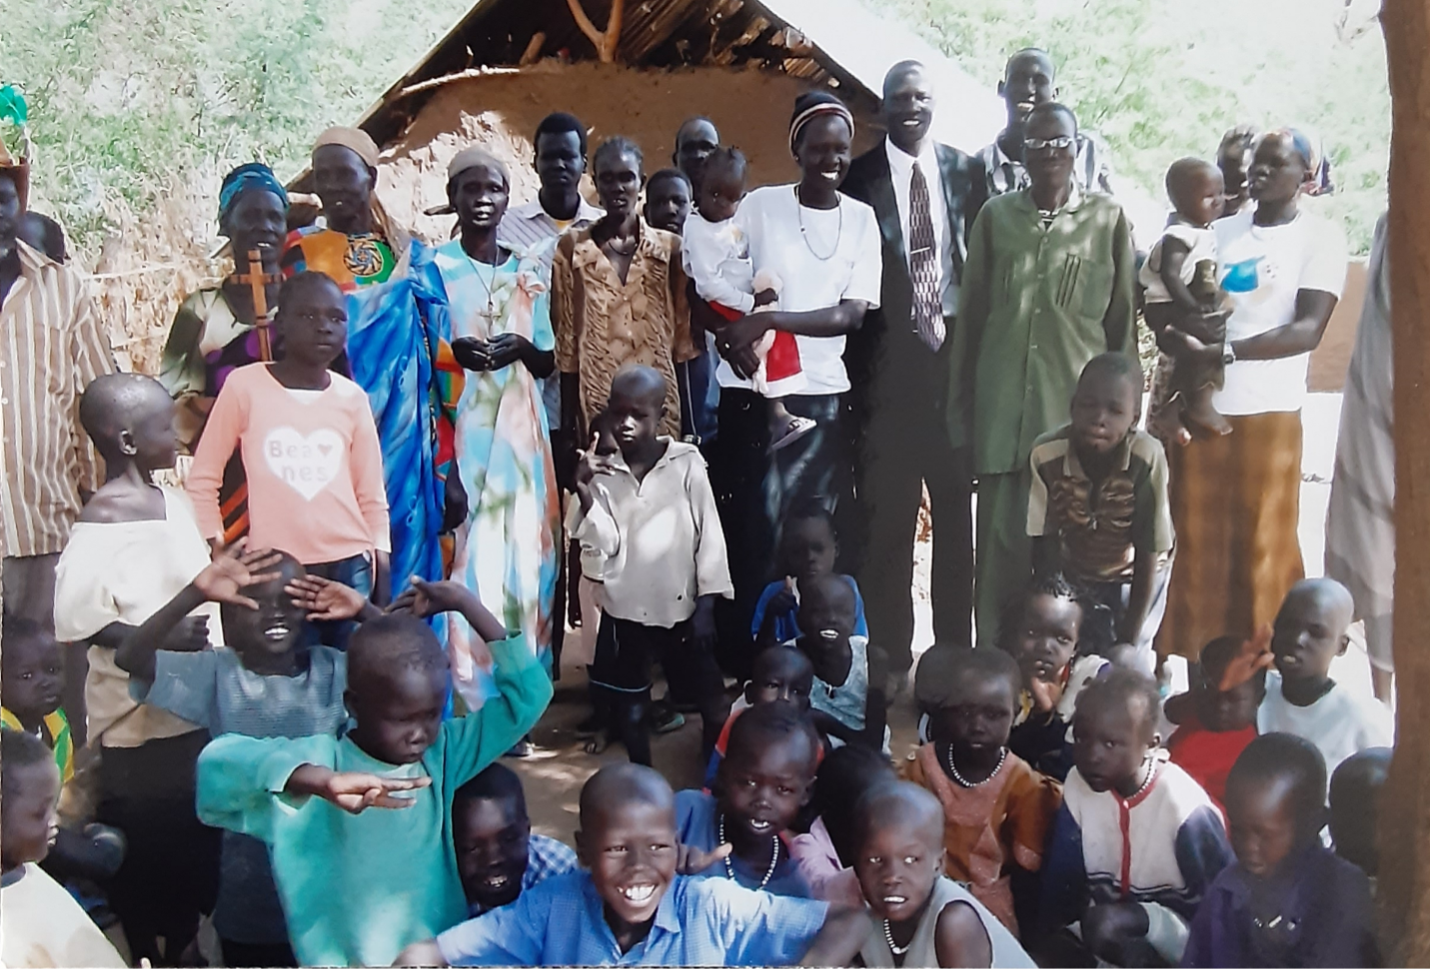 John Thon Majok shares his experience as one of the Lost Boys of Sudan, while providing vital insights for how to navigate the challenges of current human migration patterns.